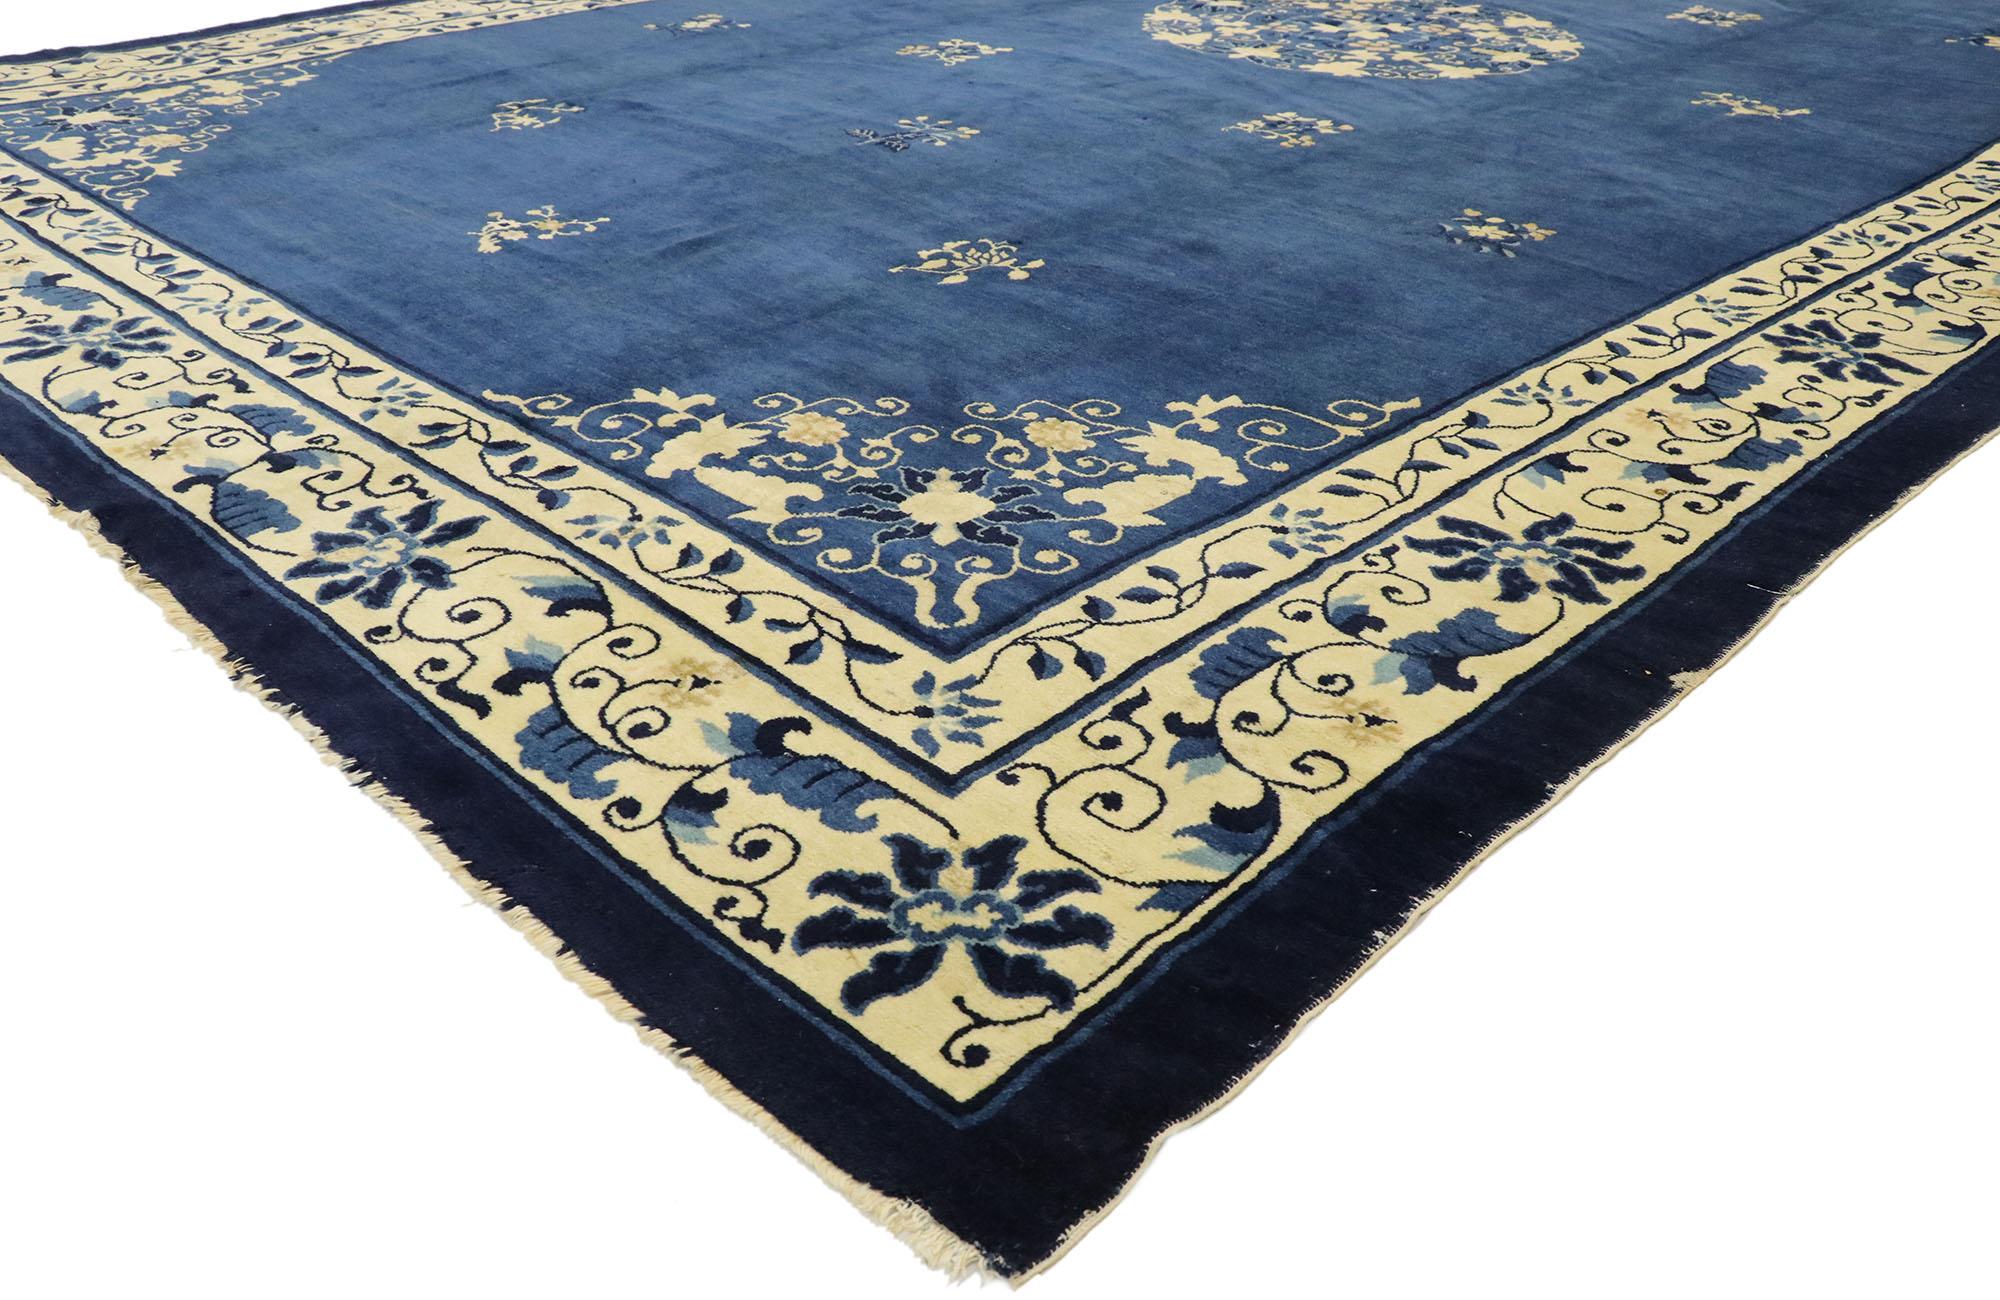 77442 antique Chinese Peking rug with Romantic chinoiserie style. This hand knotted wool antique Chinese Peking rug features a rounded open center medallion decorated with a swirl of peonies and leafy tendrils floating in the center of an abrashed